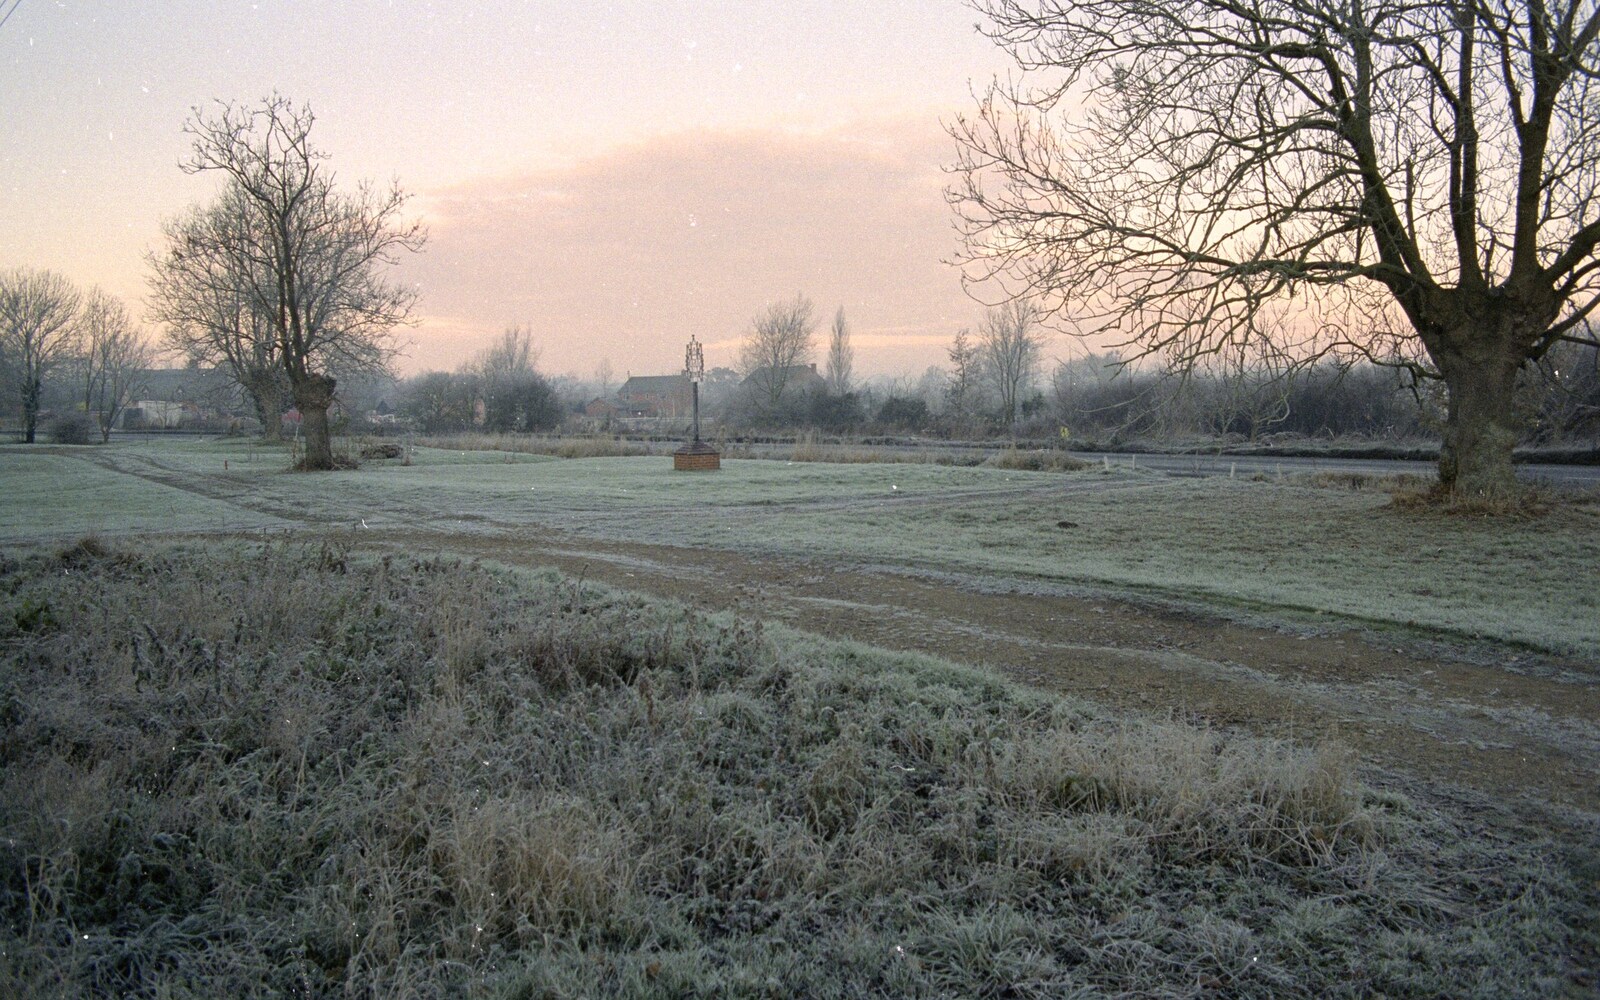 It's a frosty morning on Stuston Common from The Old Man Visits, and a Frosty Stuston, Suffolk - 8th December 1989